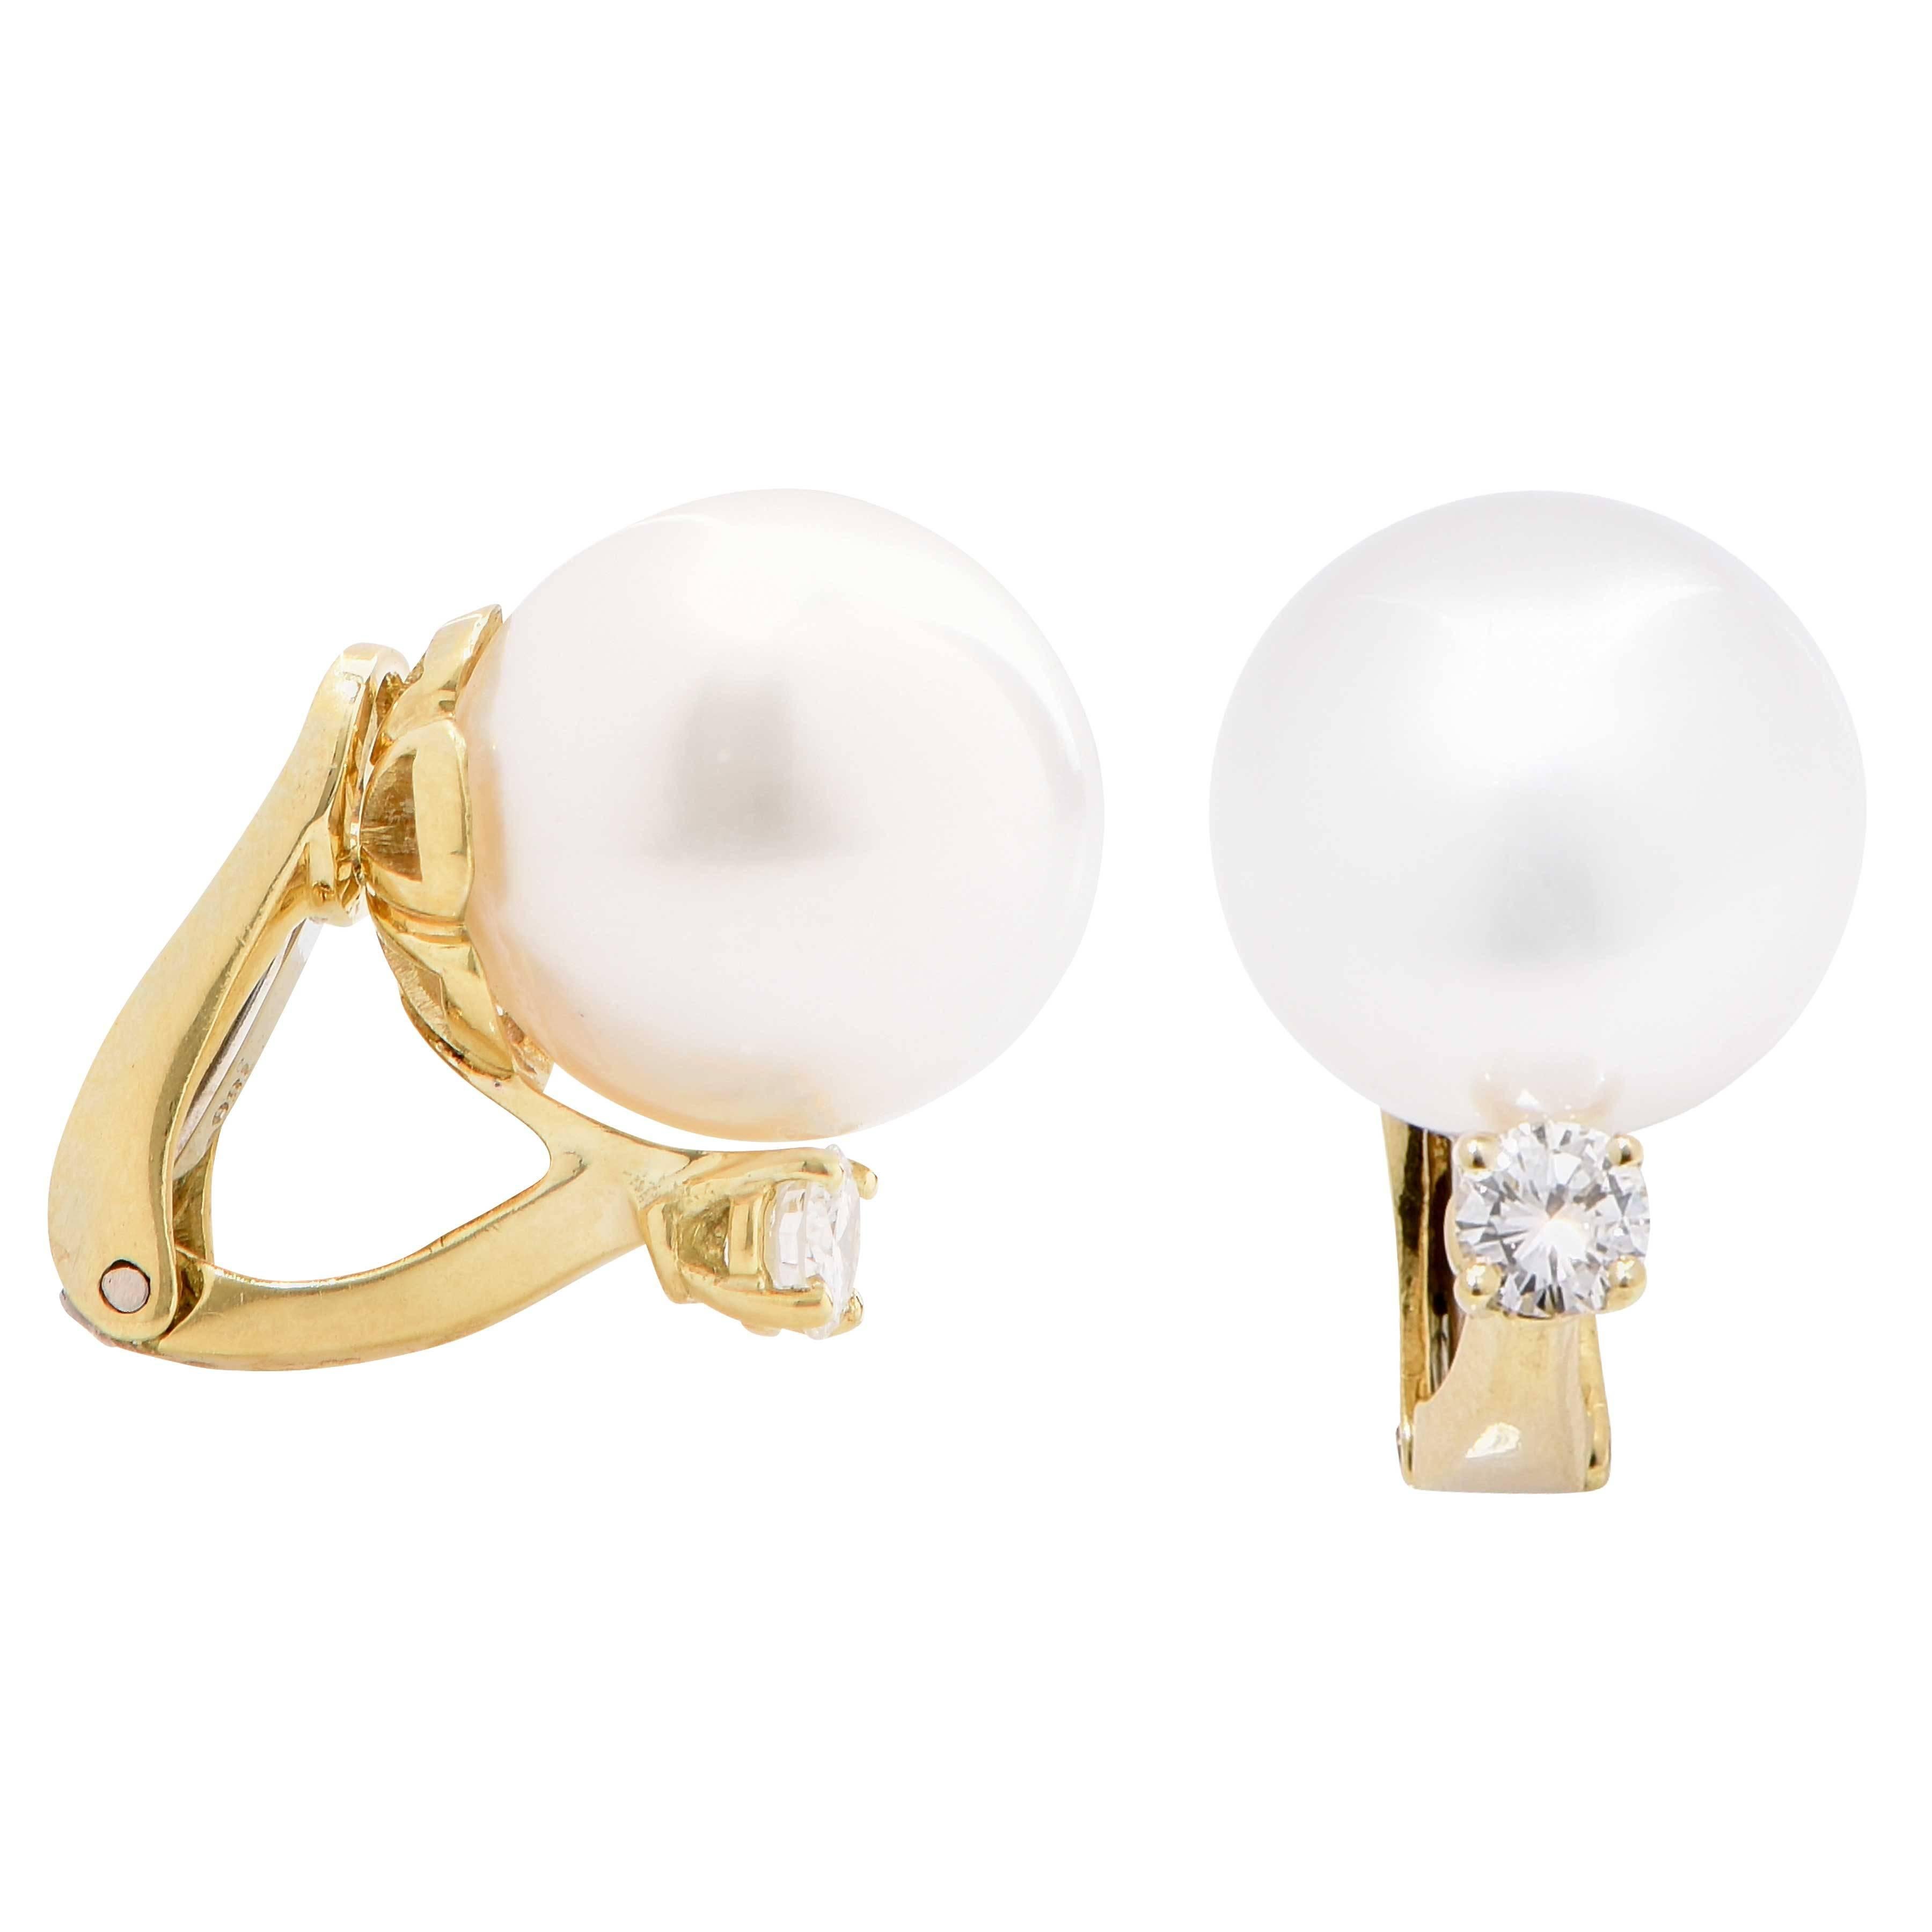 These classic pearl and diamond earrings feature two 12mm pearls as well as two round brilliant cut diamonds with an estimated total weight of .40 carat. 

Metal Type: 18 Kt Yellow Gold (Tested and/or stamped)
